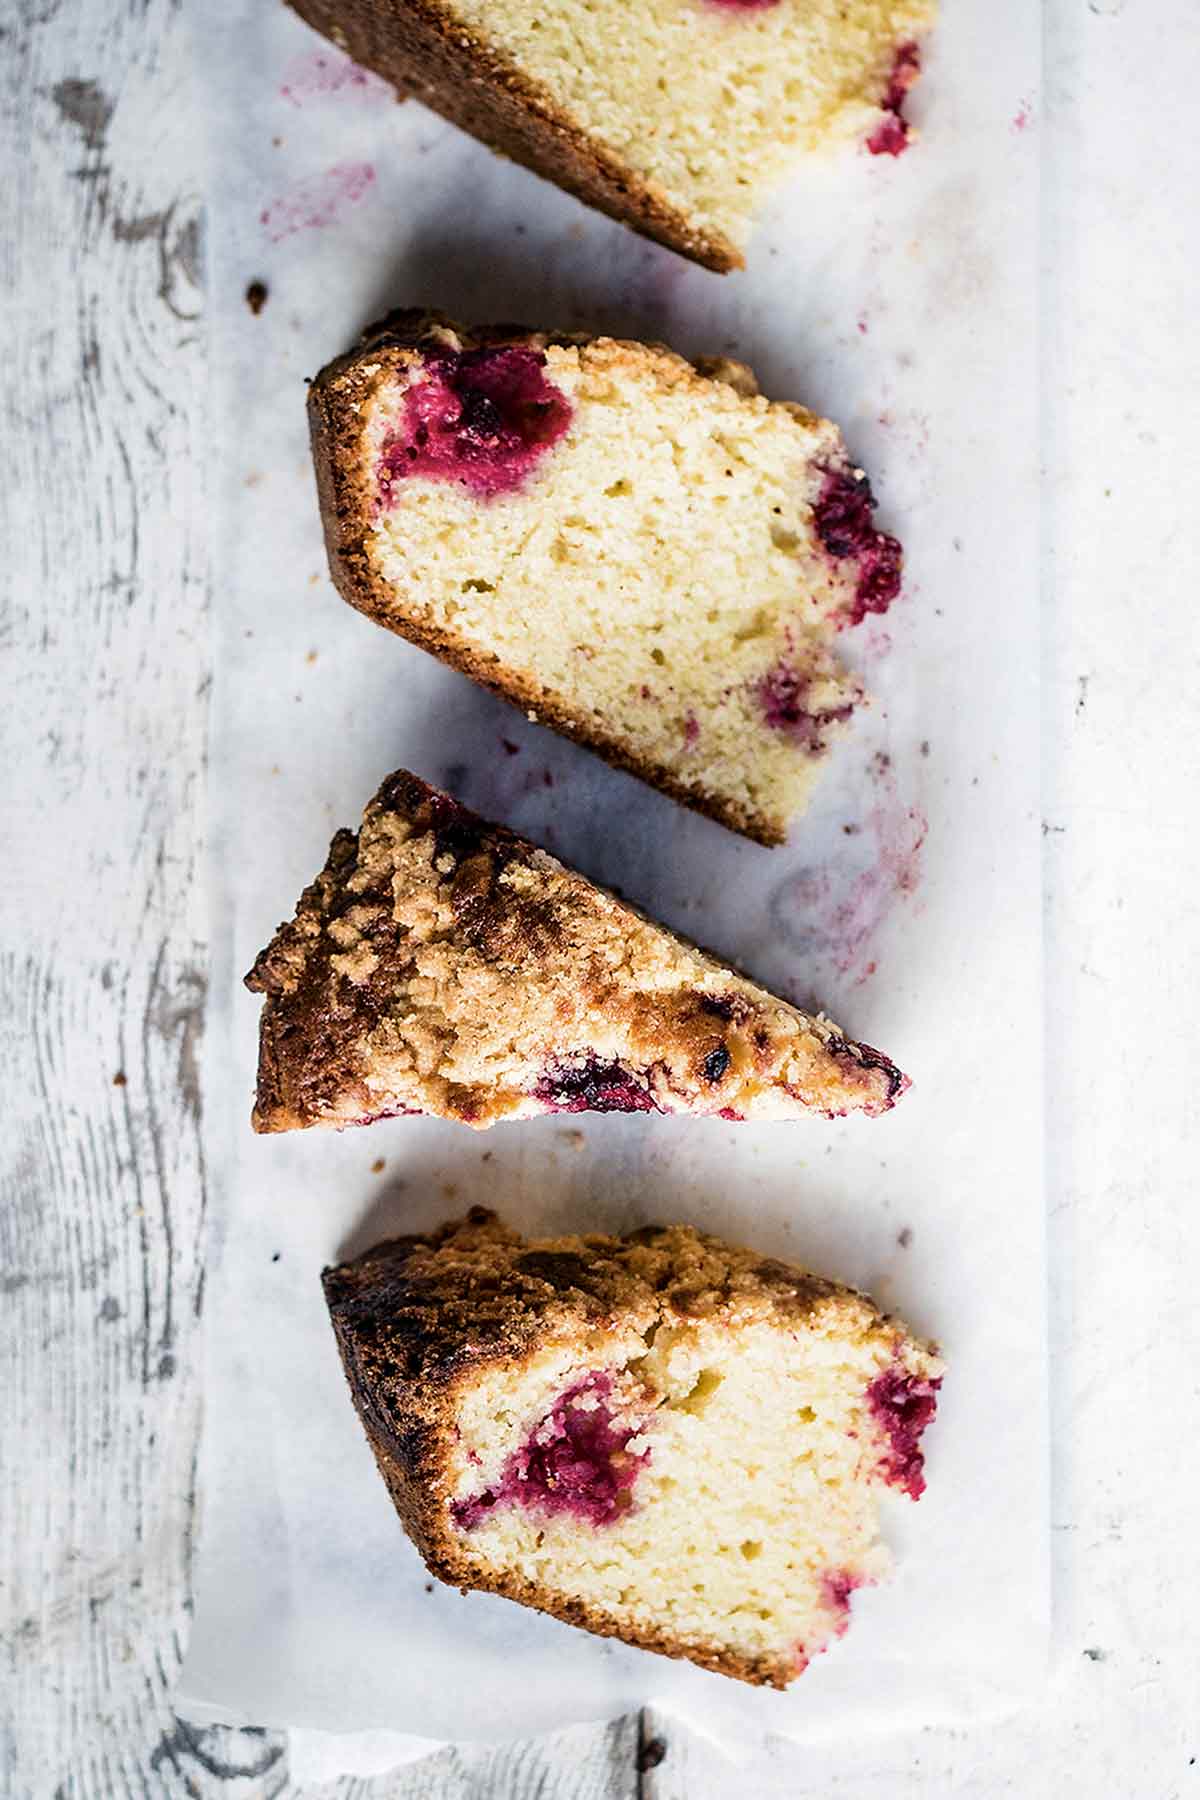 Four wedges of raspberry streusel coffee cake on a white wooden background.